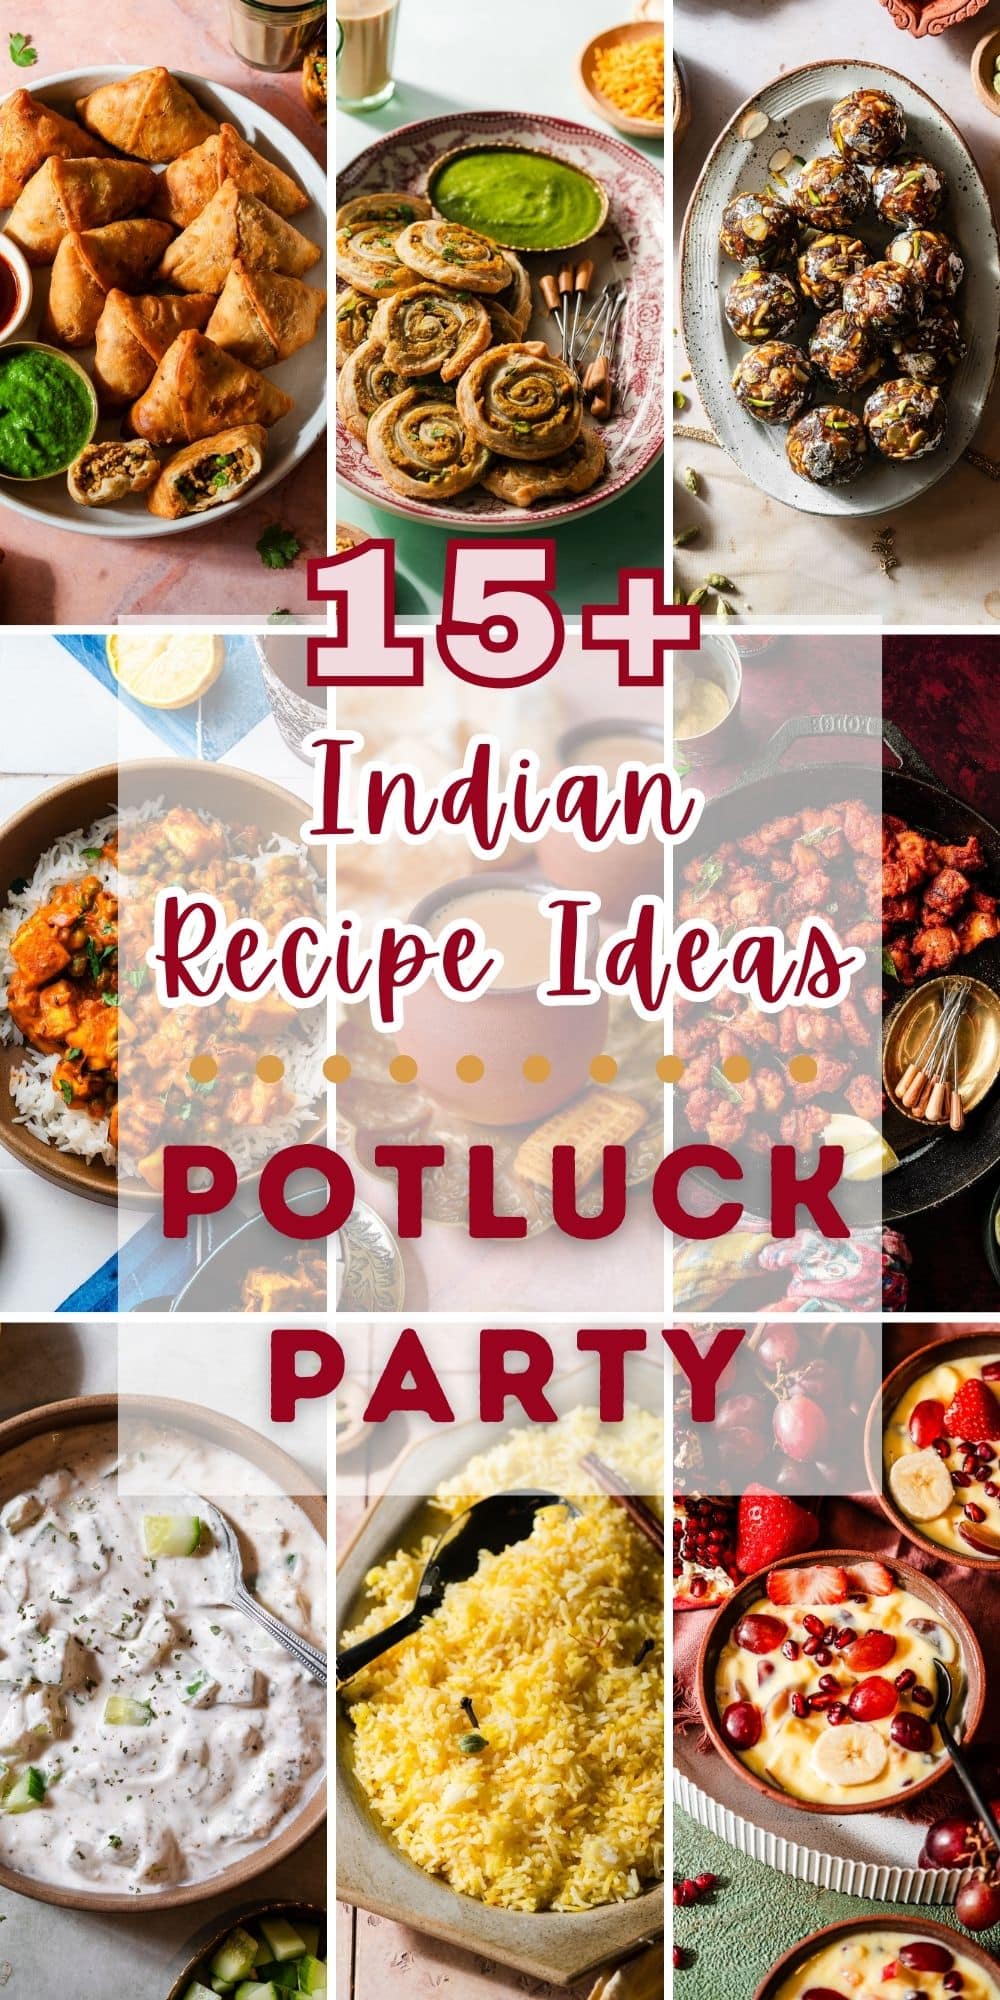 "15+ Indian Recipe Ideas - Potluck Party" with a collage of Indian food.